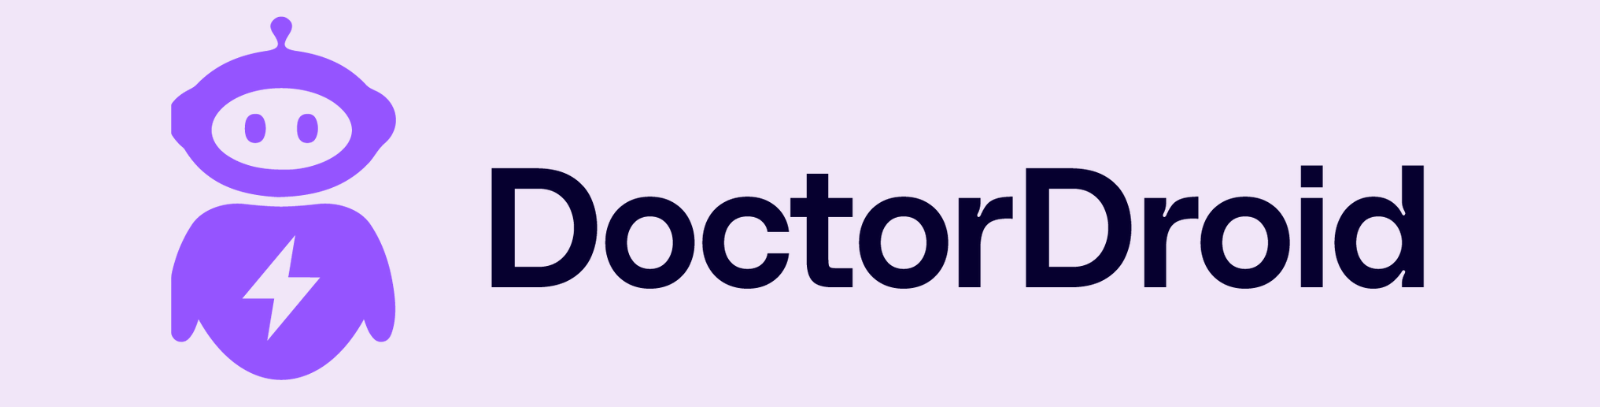 Doctor Droid Logo